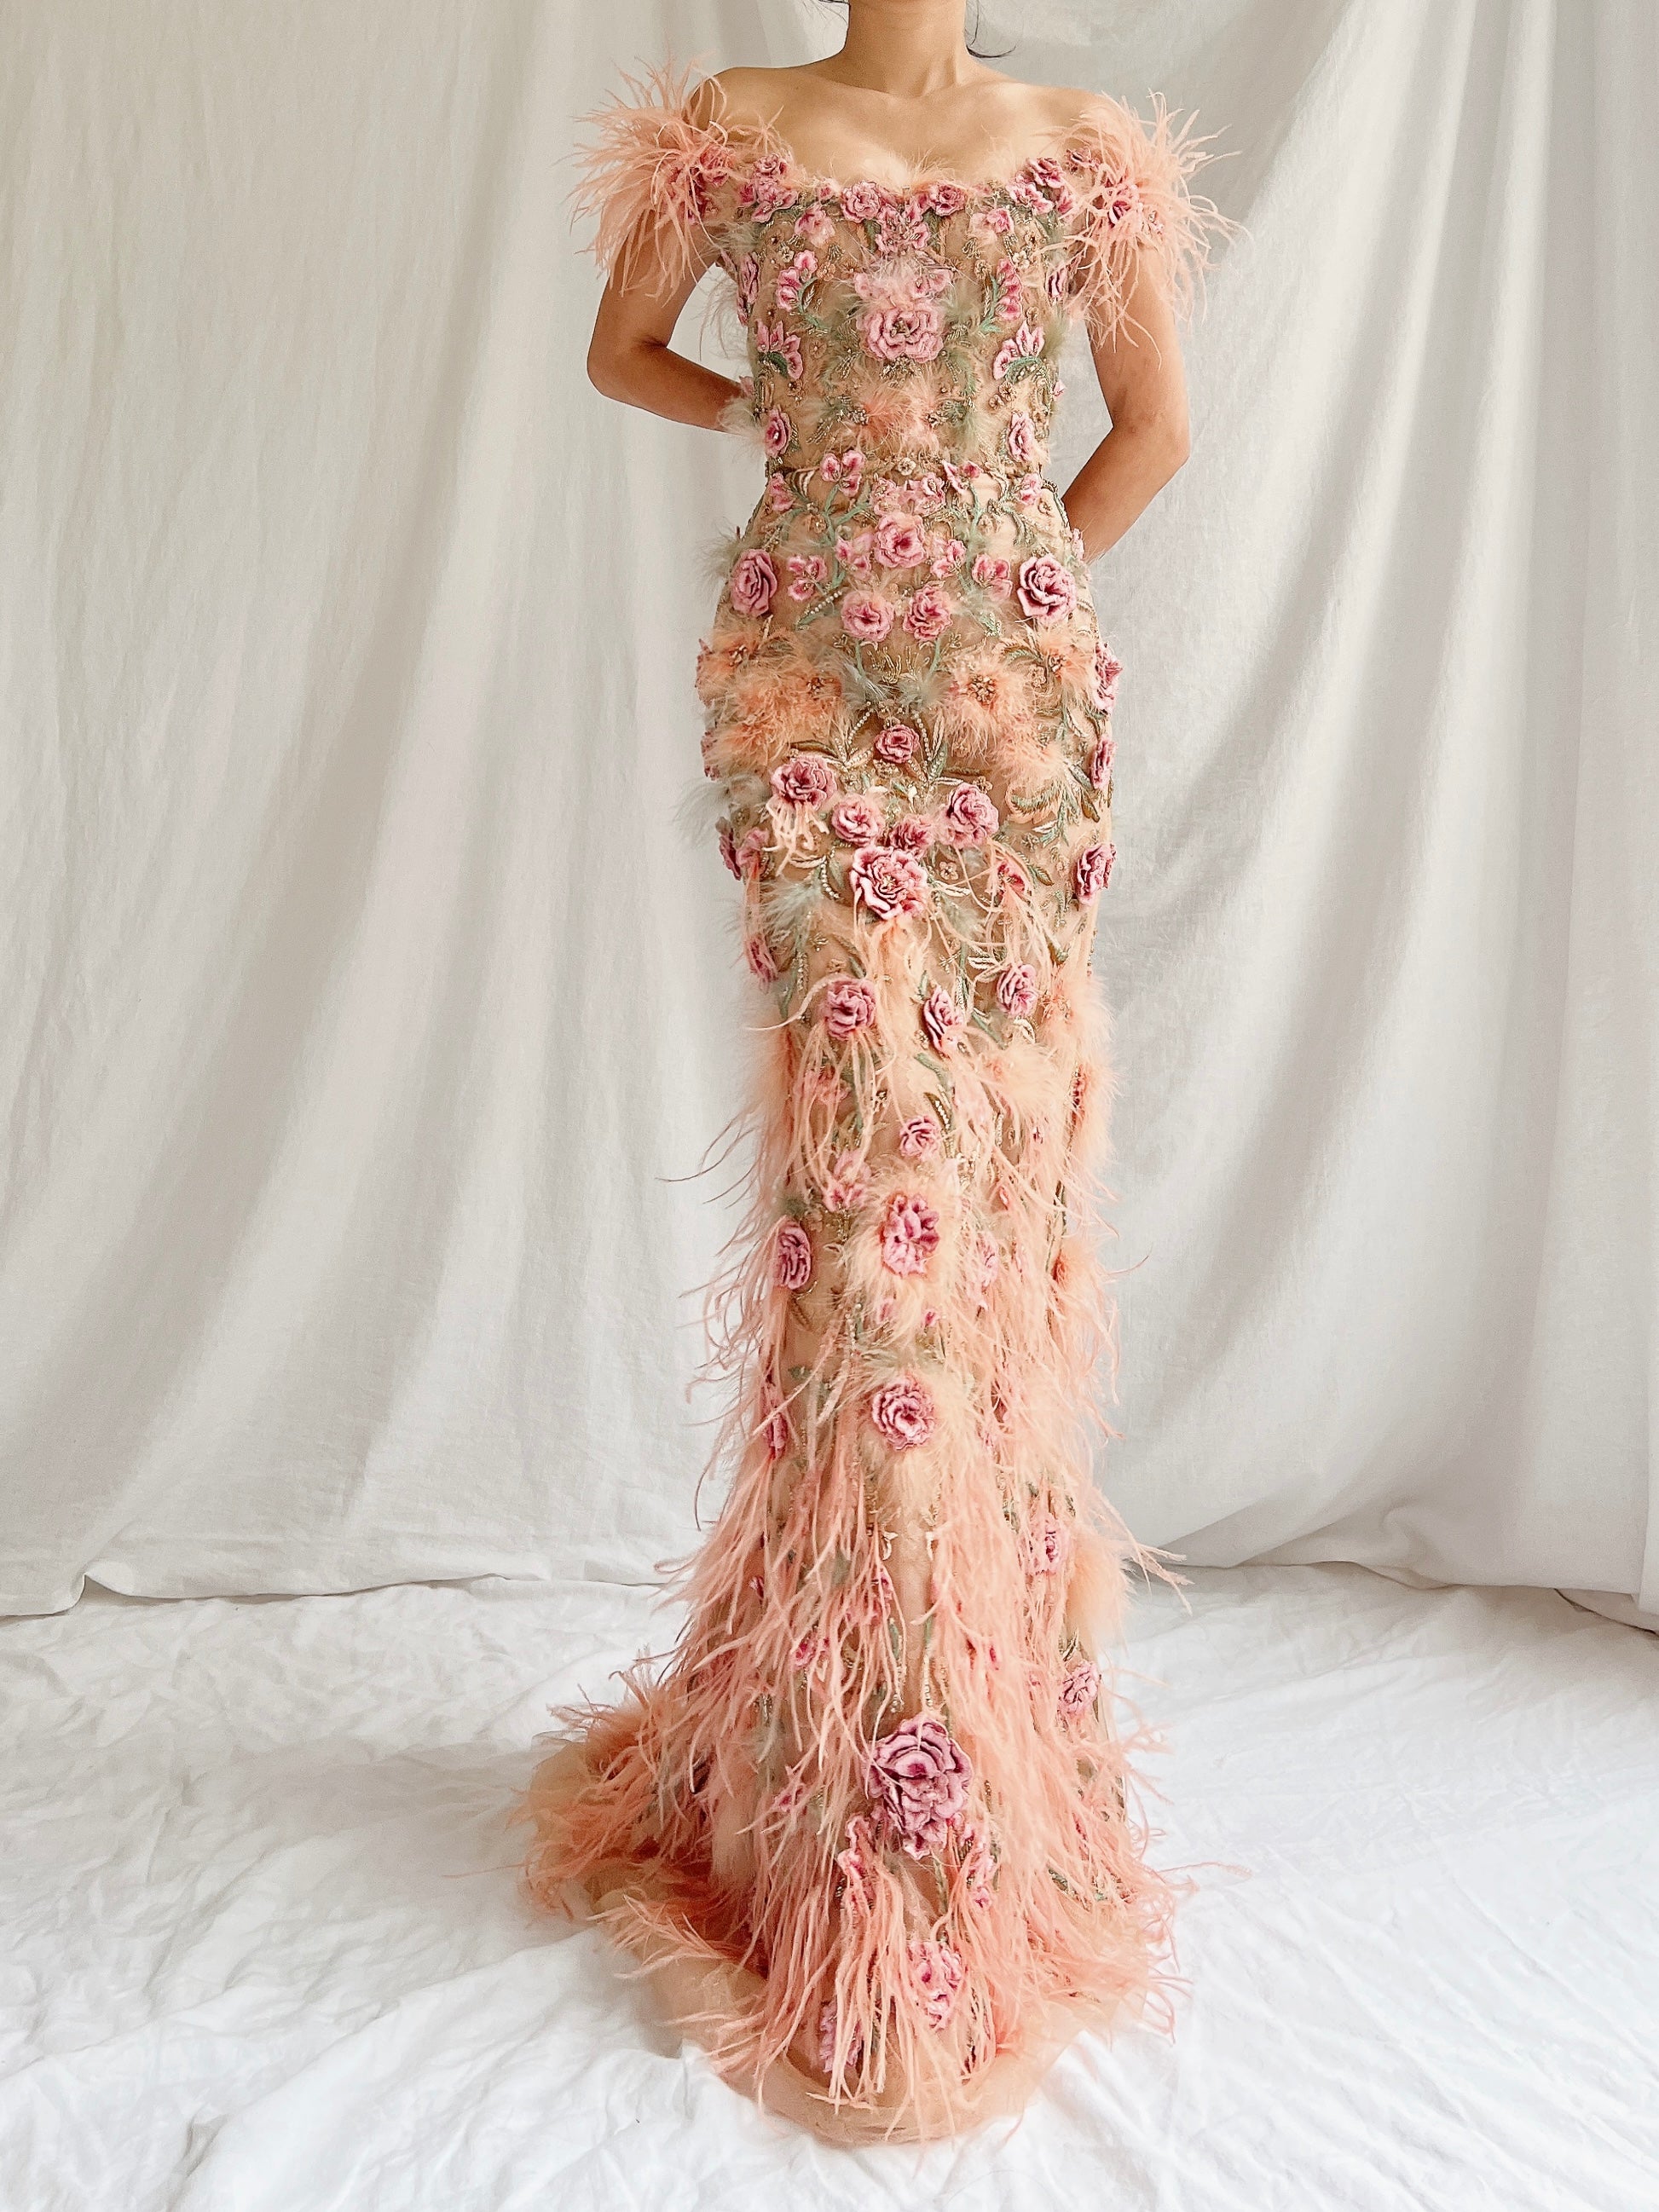 Marchesa Peach Feather 3D Embellished Gown - XS